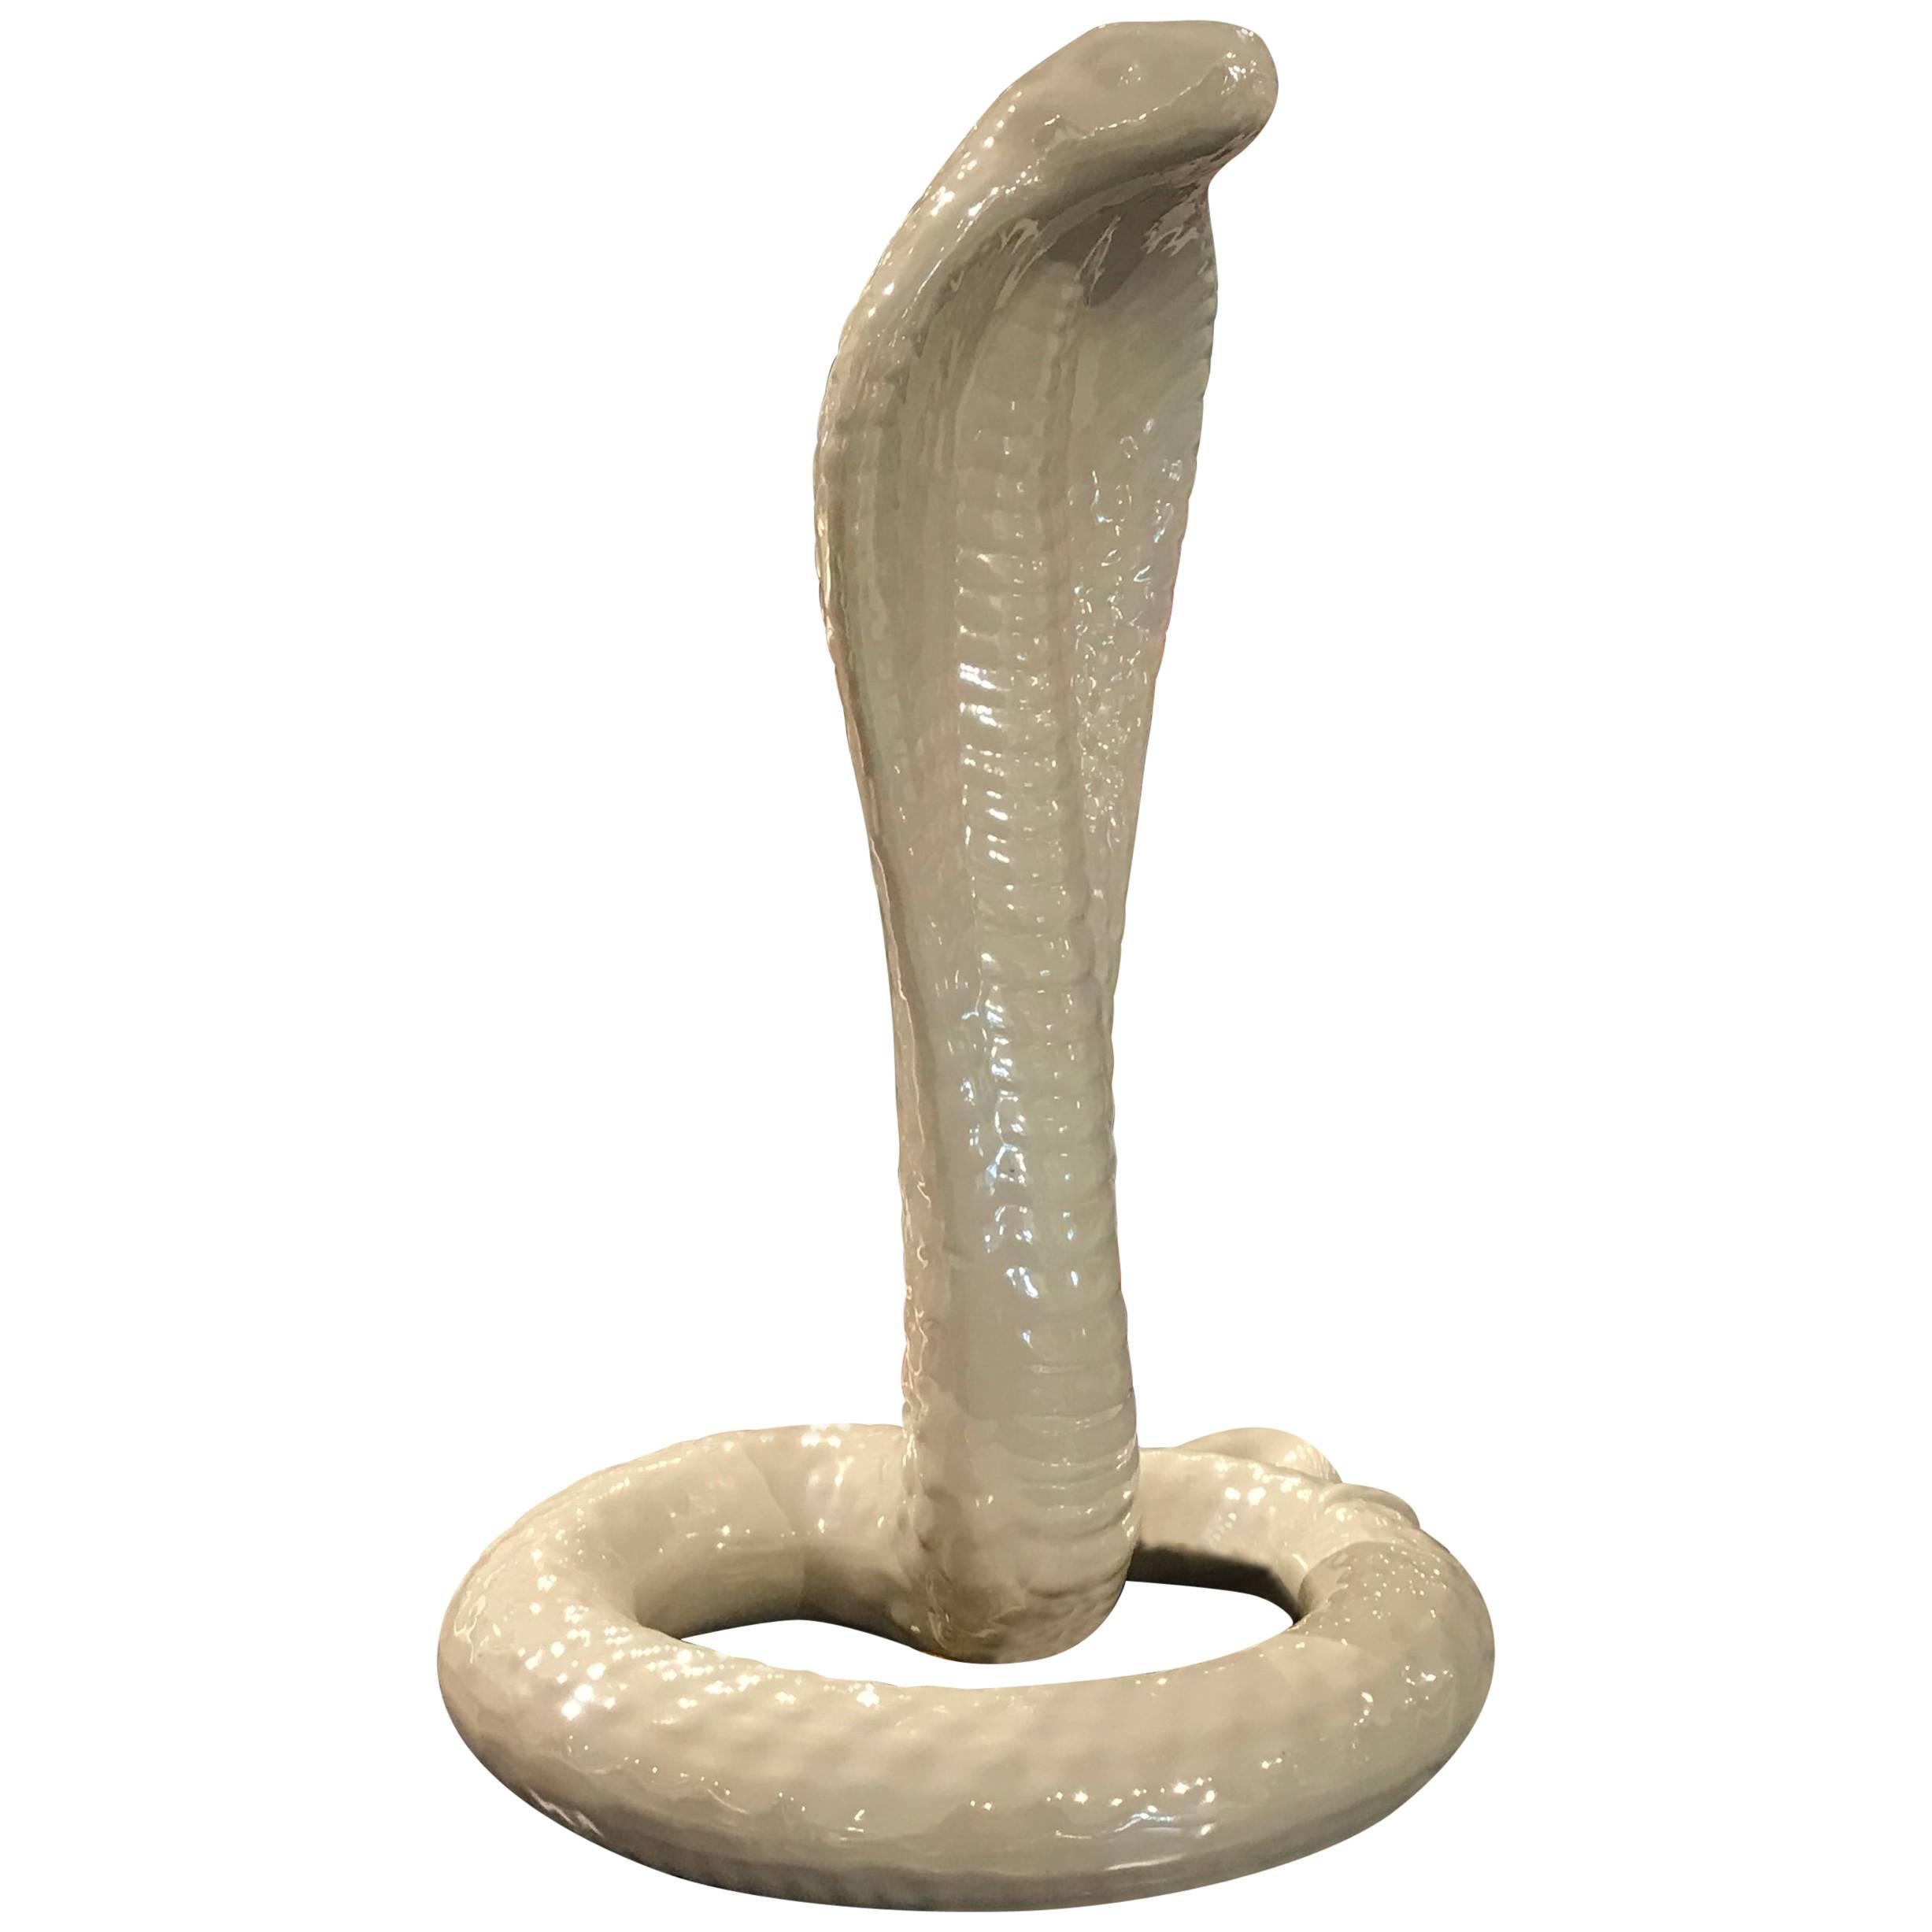 Gorgeous and rare pearlescent white cobra snake table lamp by Tommaso Barbi. The pearlescent finish on the lamp gives it a nice glow which immediately draws the eye.